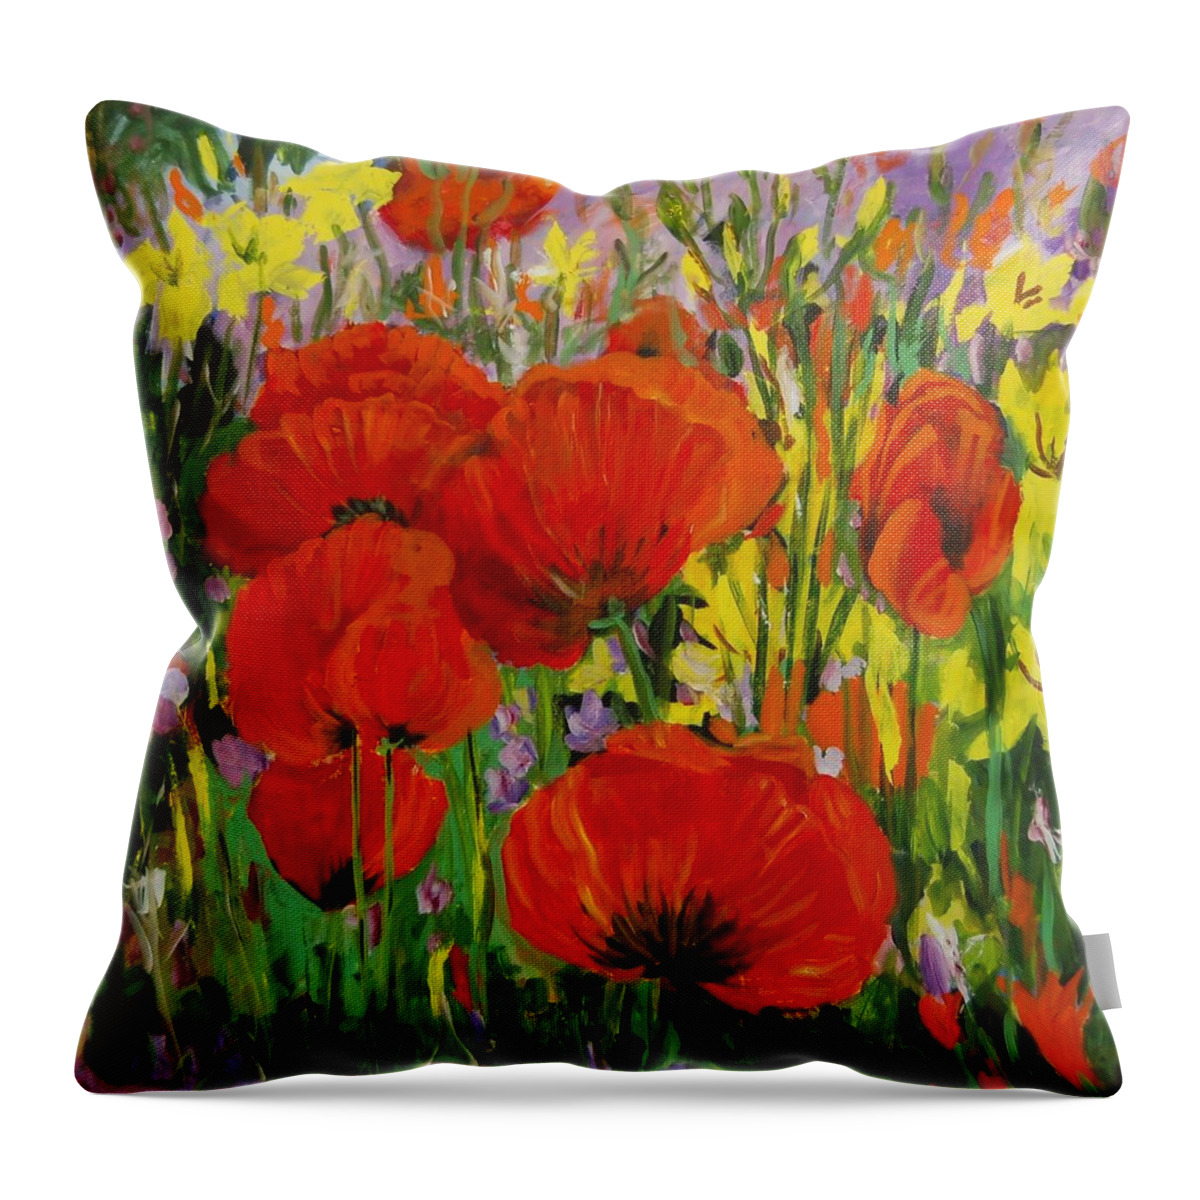 Ingrid Dohm Throw Pillow featuring the painting Poppies by Ingrid Dohm